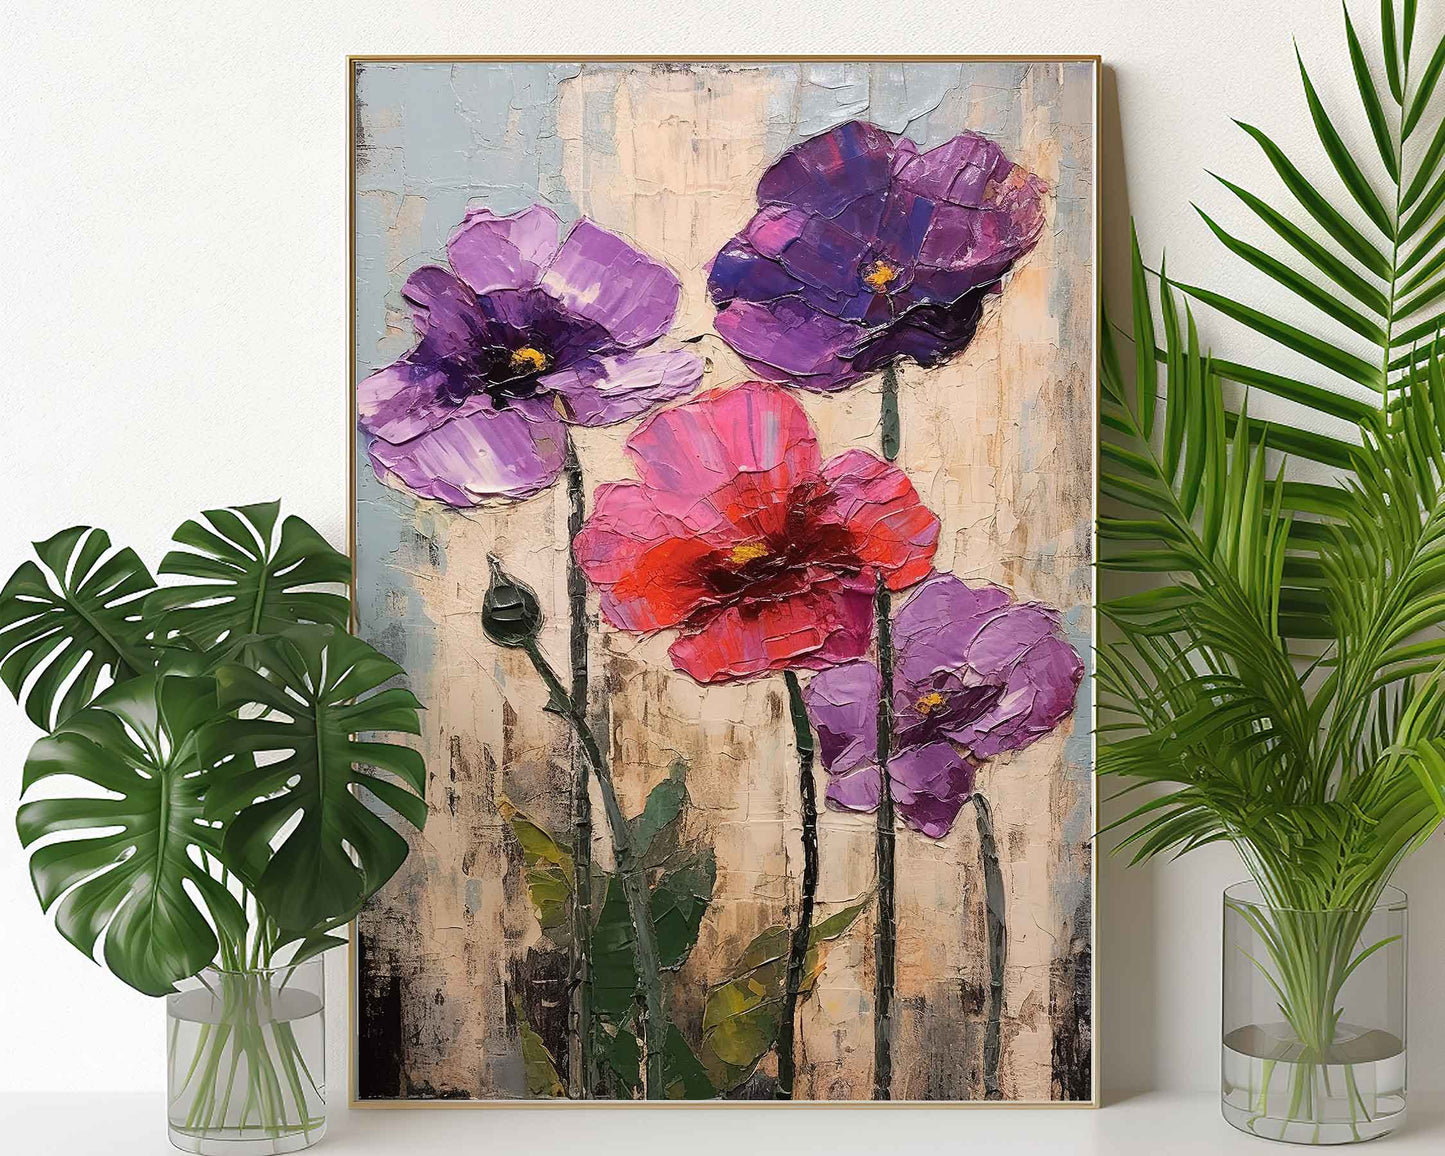 Framed Image of Colourful Flowers Oil Painting Impasto Thick Palette Wall Art Prints